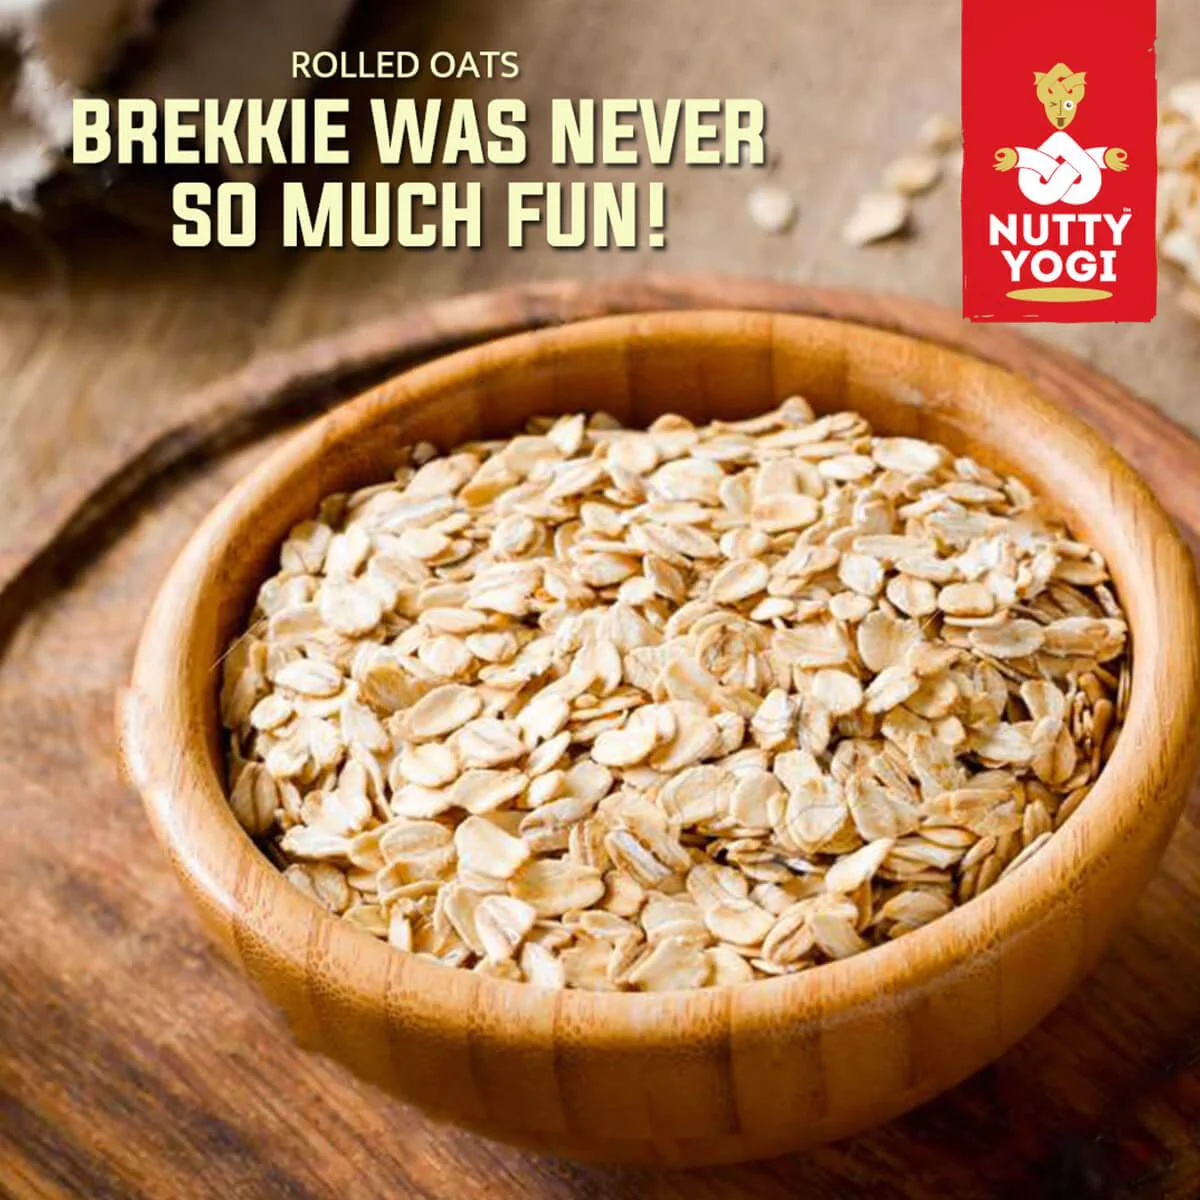 Product: Nutty Yogi Rolled Oats